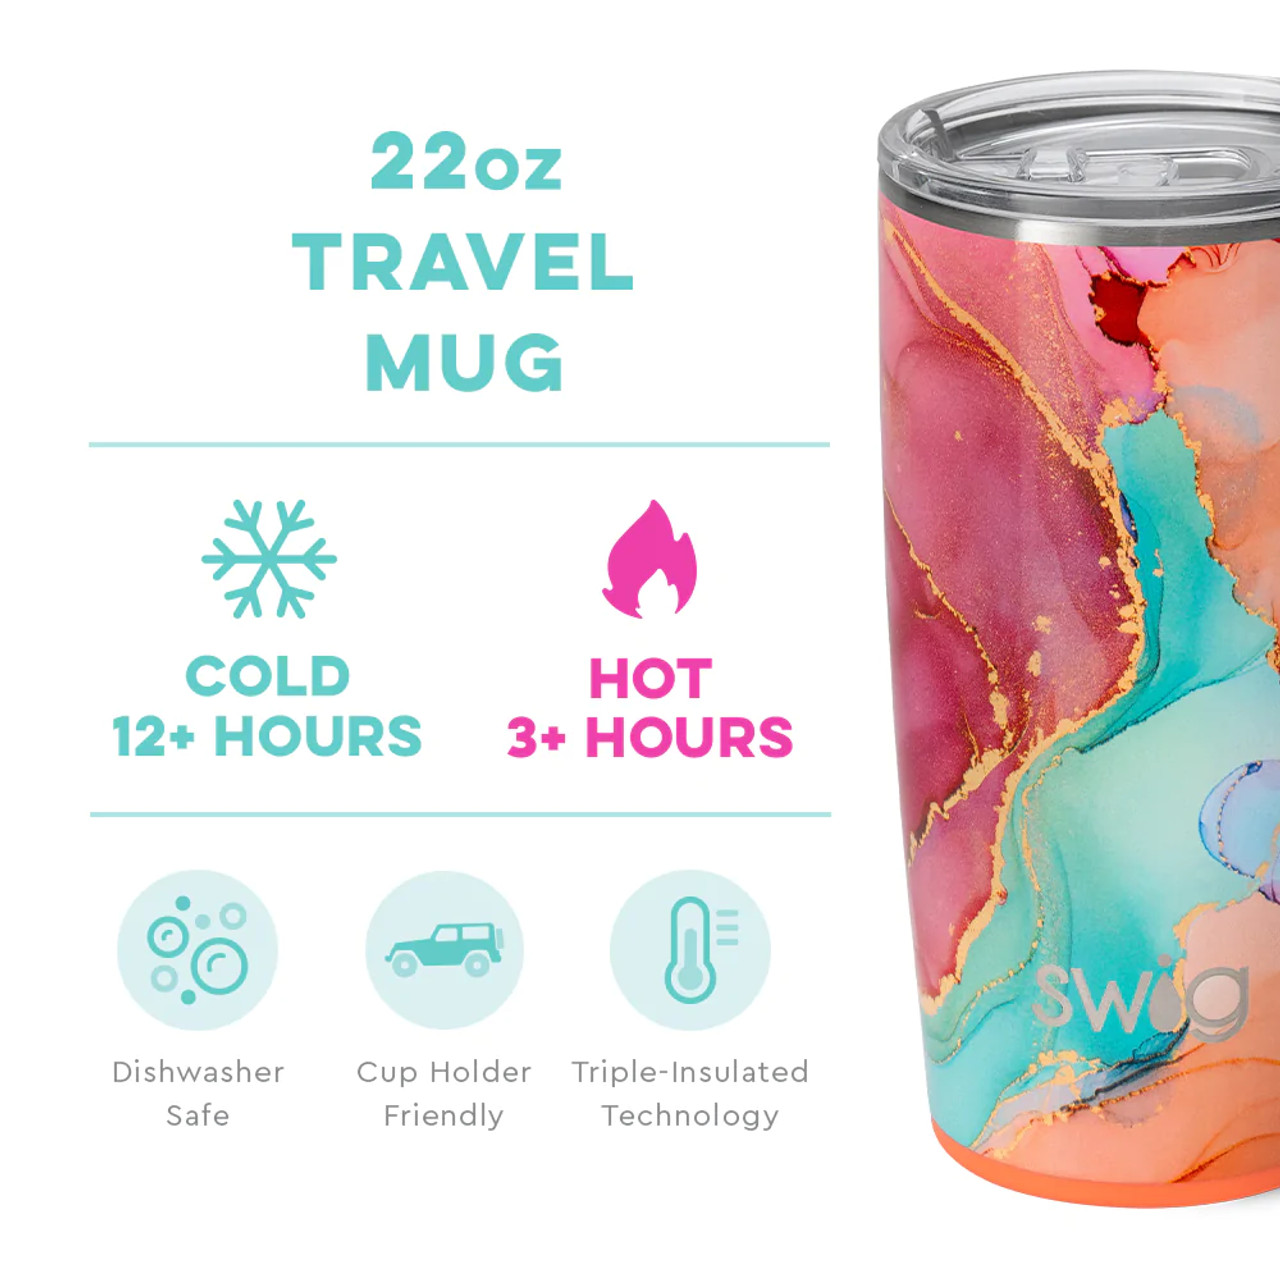 https://cdn11.bigcommerce.com/s-e3nb6xi/images/stencil/1280x1280/products/25255/127002/swig-life-signature-22oz-insulated-stainless-steel-travel-mug-dreamsicle-temp-info__44110.1689105331.jpg?c=2